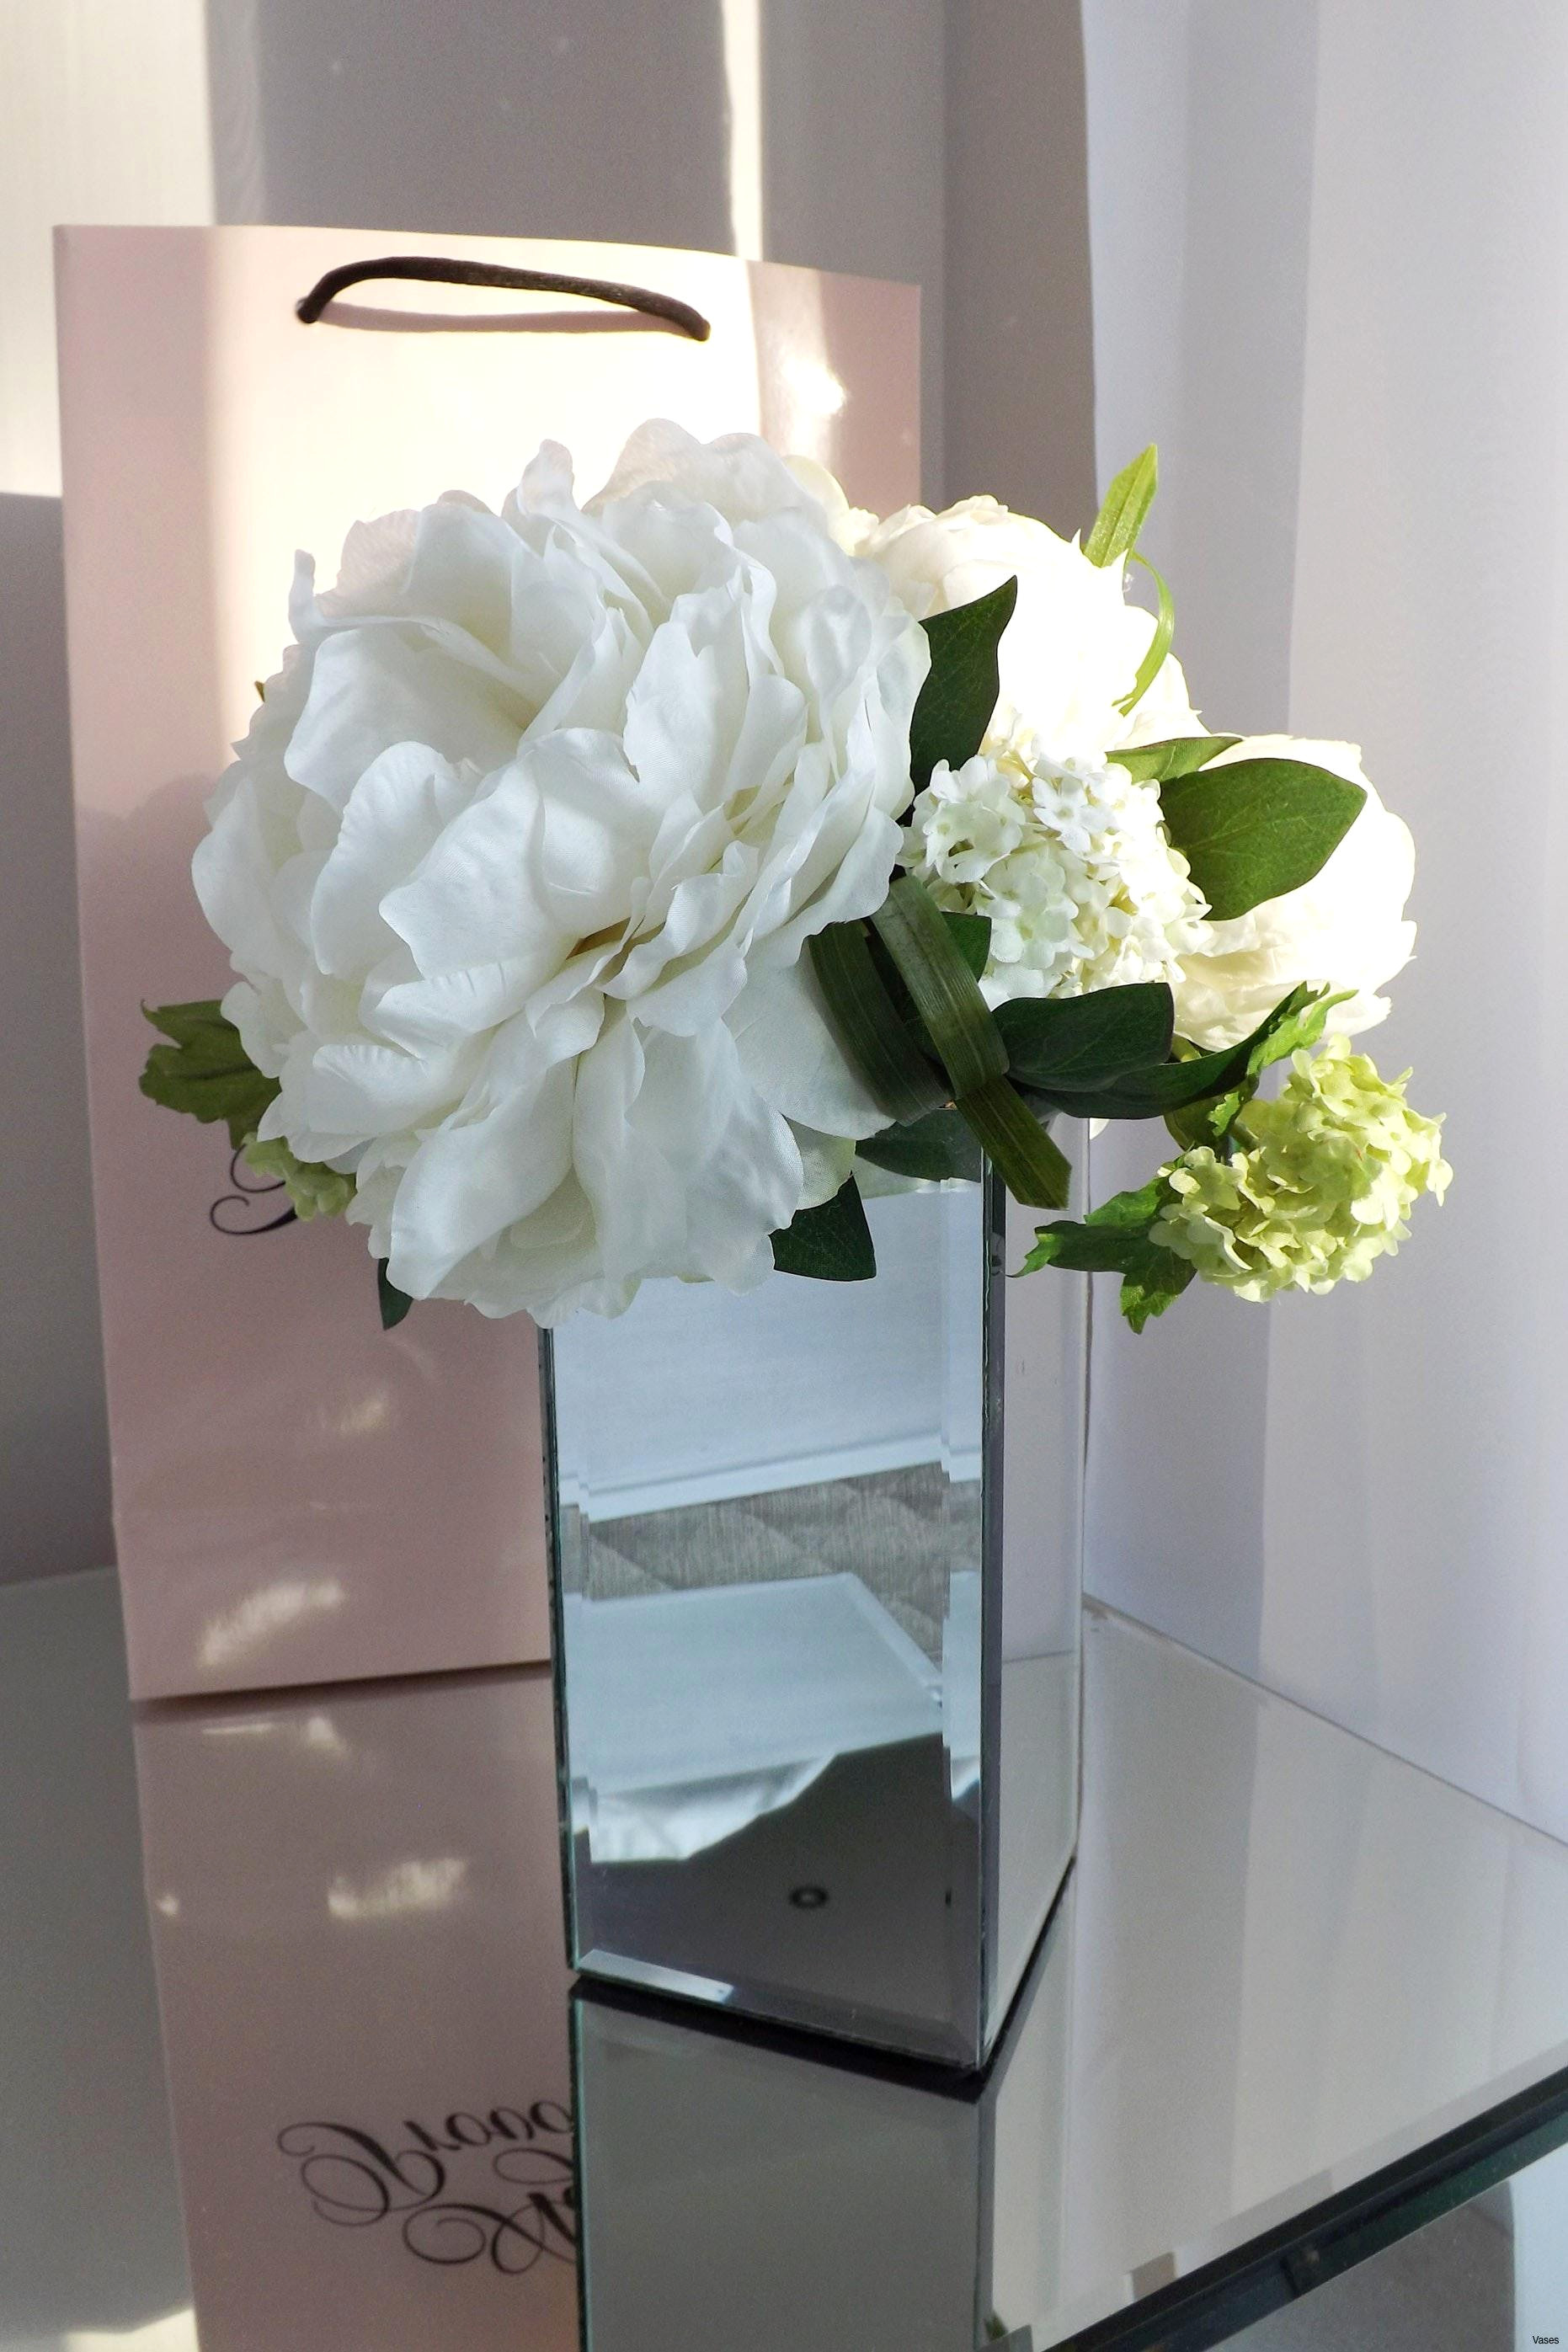 19 Great Picture Frame Vase 2023 free download picture frame vase of walmart wedding decorations best of h vases candy vase i 0d diy with related post